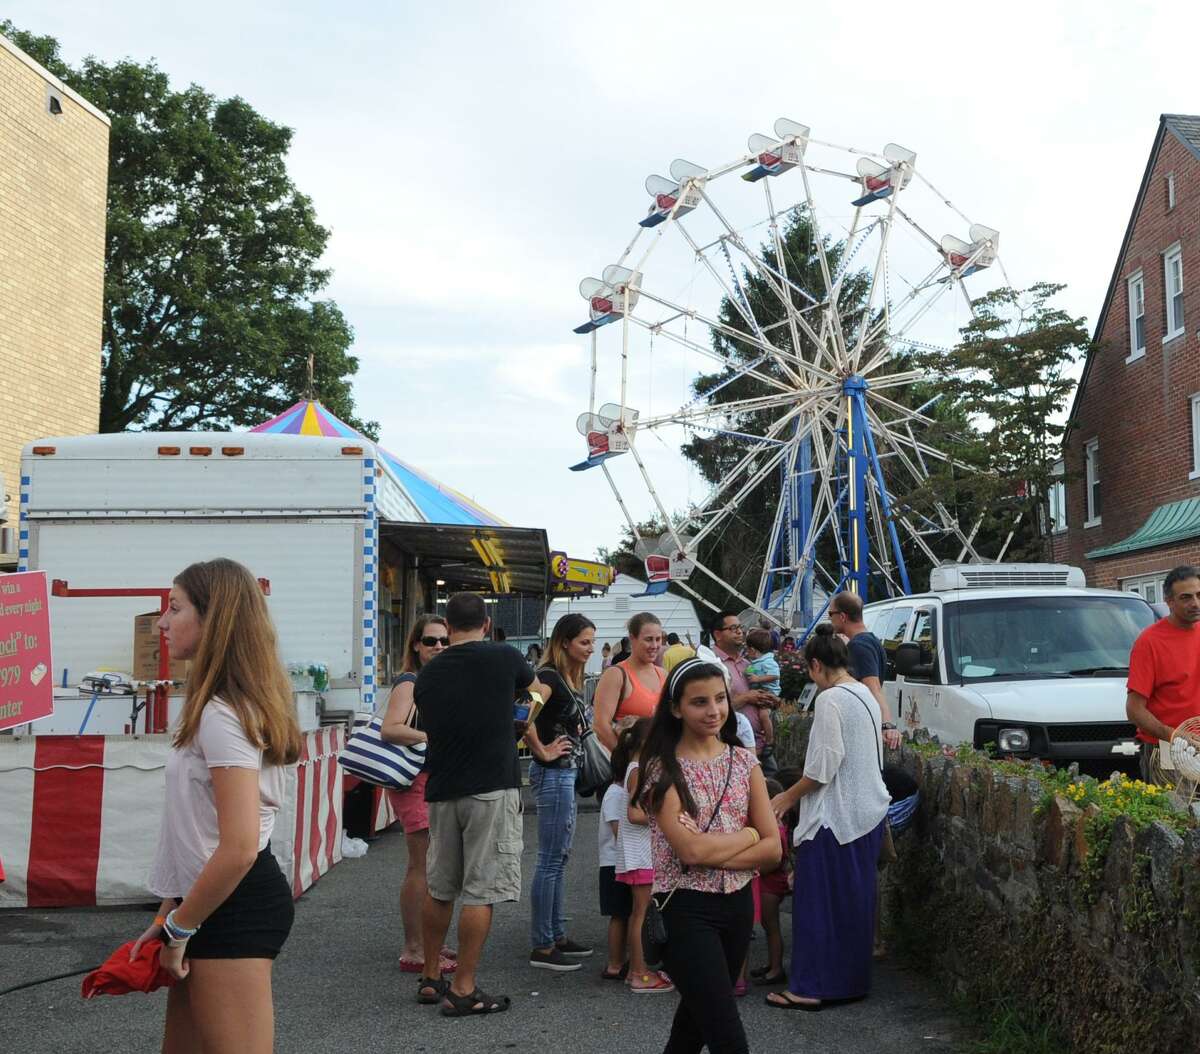 The annual St. Roch's Feast at St. Roch Church in the Chickahominy section of Greenwich, features live music, food, games, rides and entertainment along St. Roch’s Avenue. The event, a major fundraiser for St. Roch’s Church, will be held from 6 to 10:30 p.m. Wednesday and Thursday and from 6 to 11 p.m. Friday and Saturday.